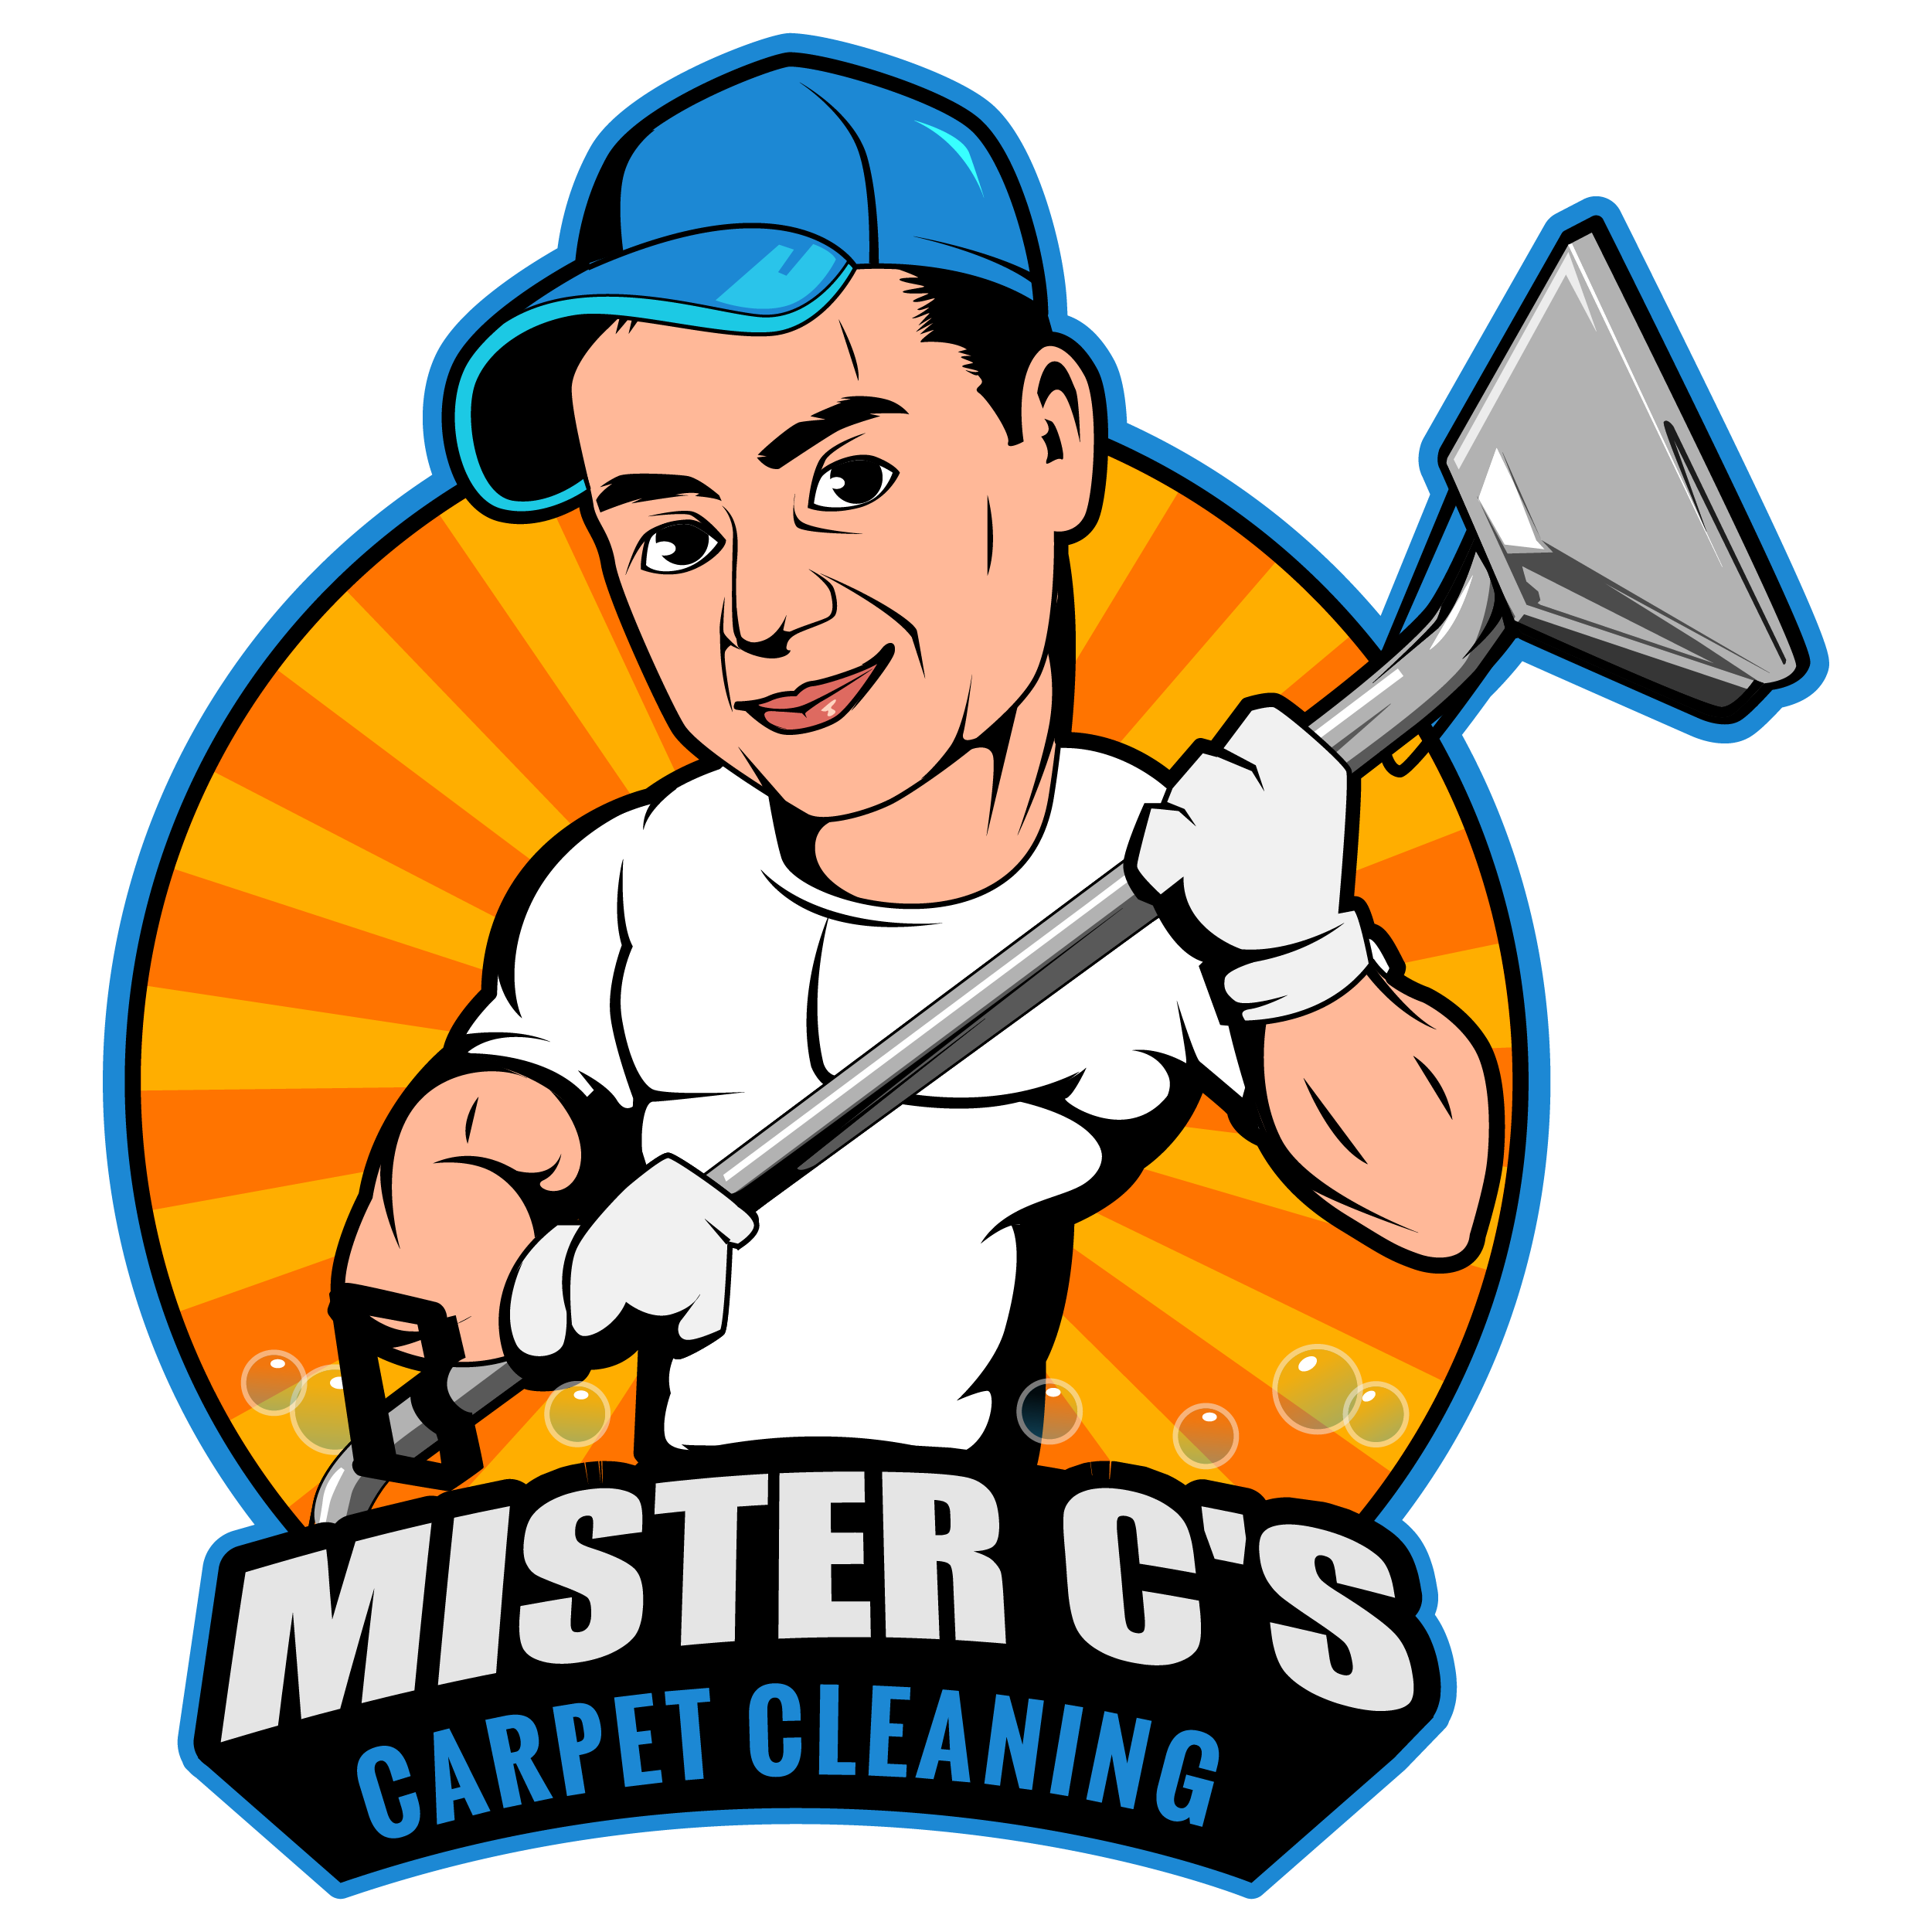 Auto, Boat, & RV cleaning - Mister C's Carpet Cleaning